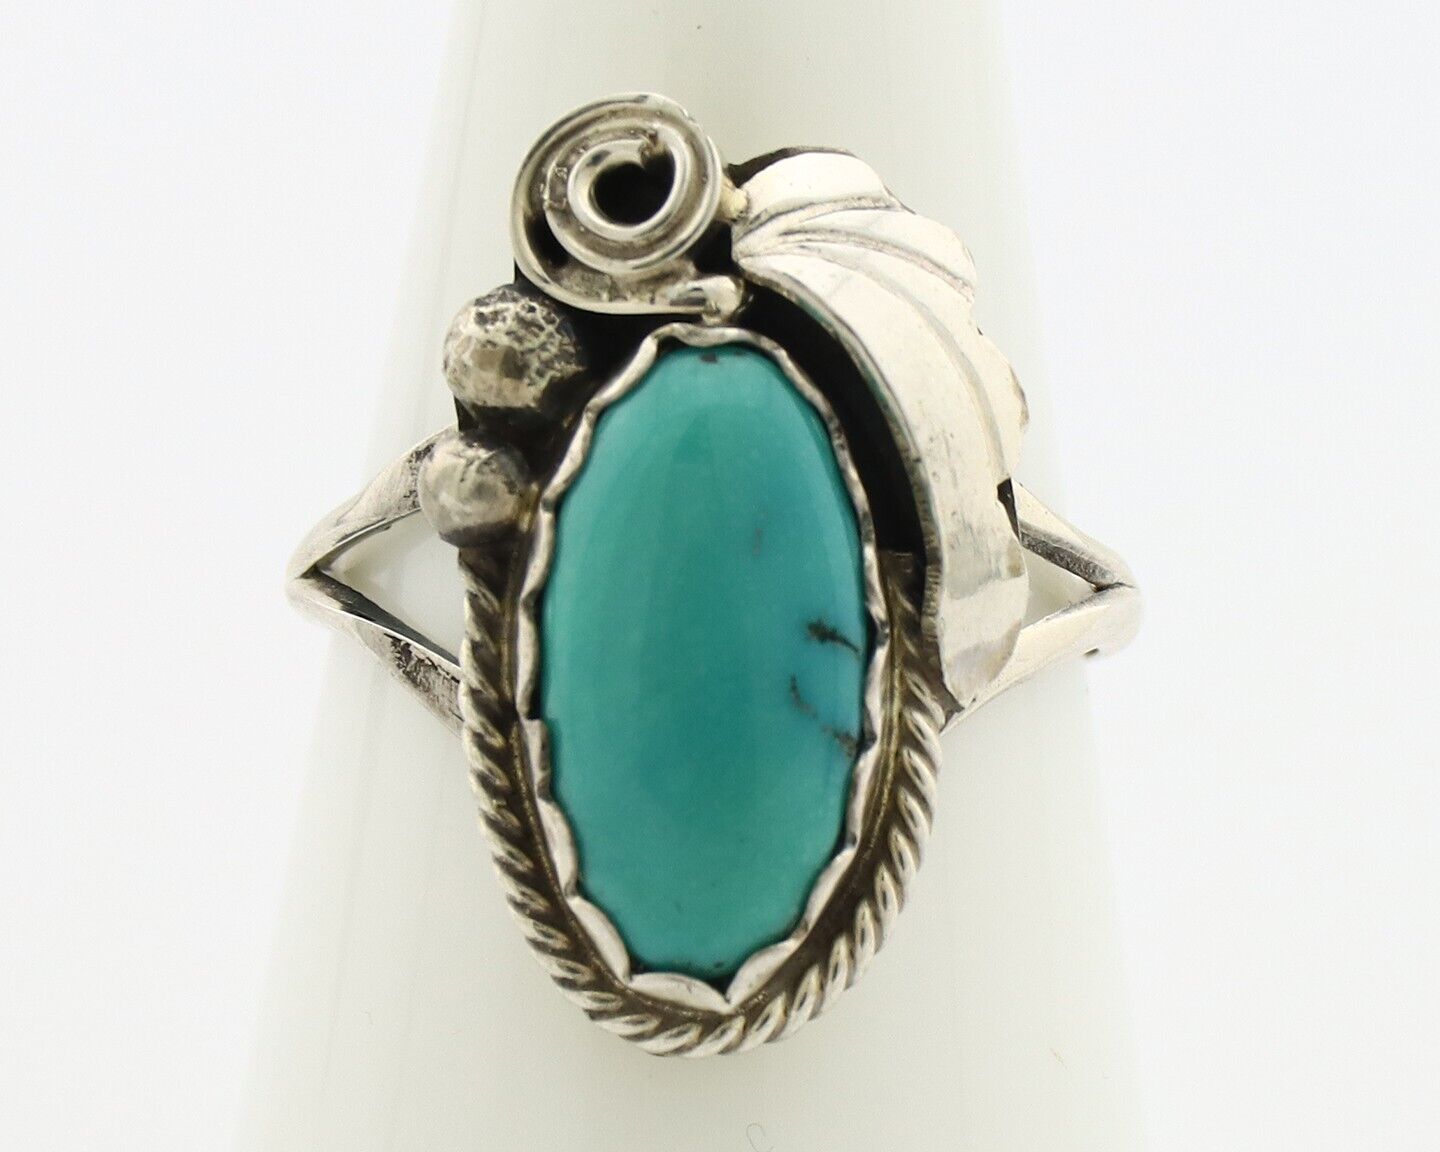 Navajo Inlaid Ring 925 Silver Blue Turquoise Artist Signed Justin Morris C.80s